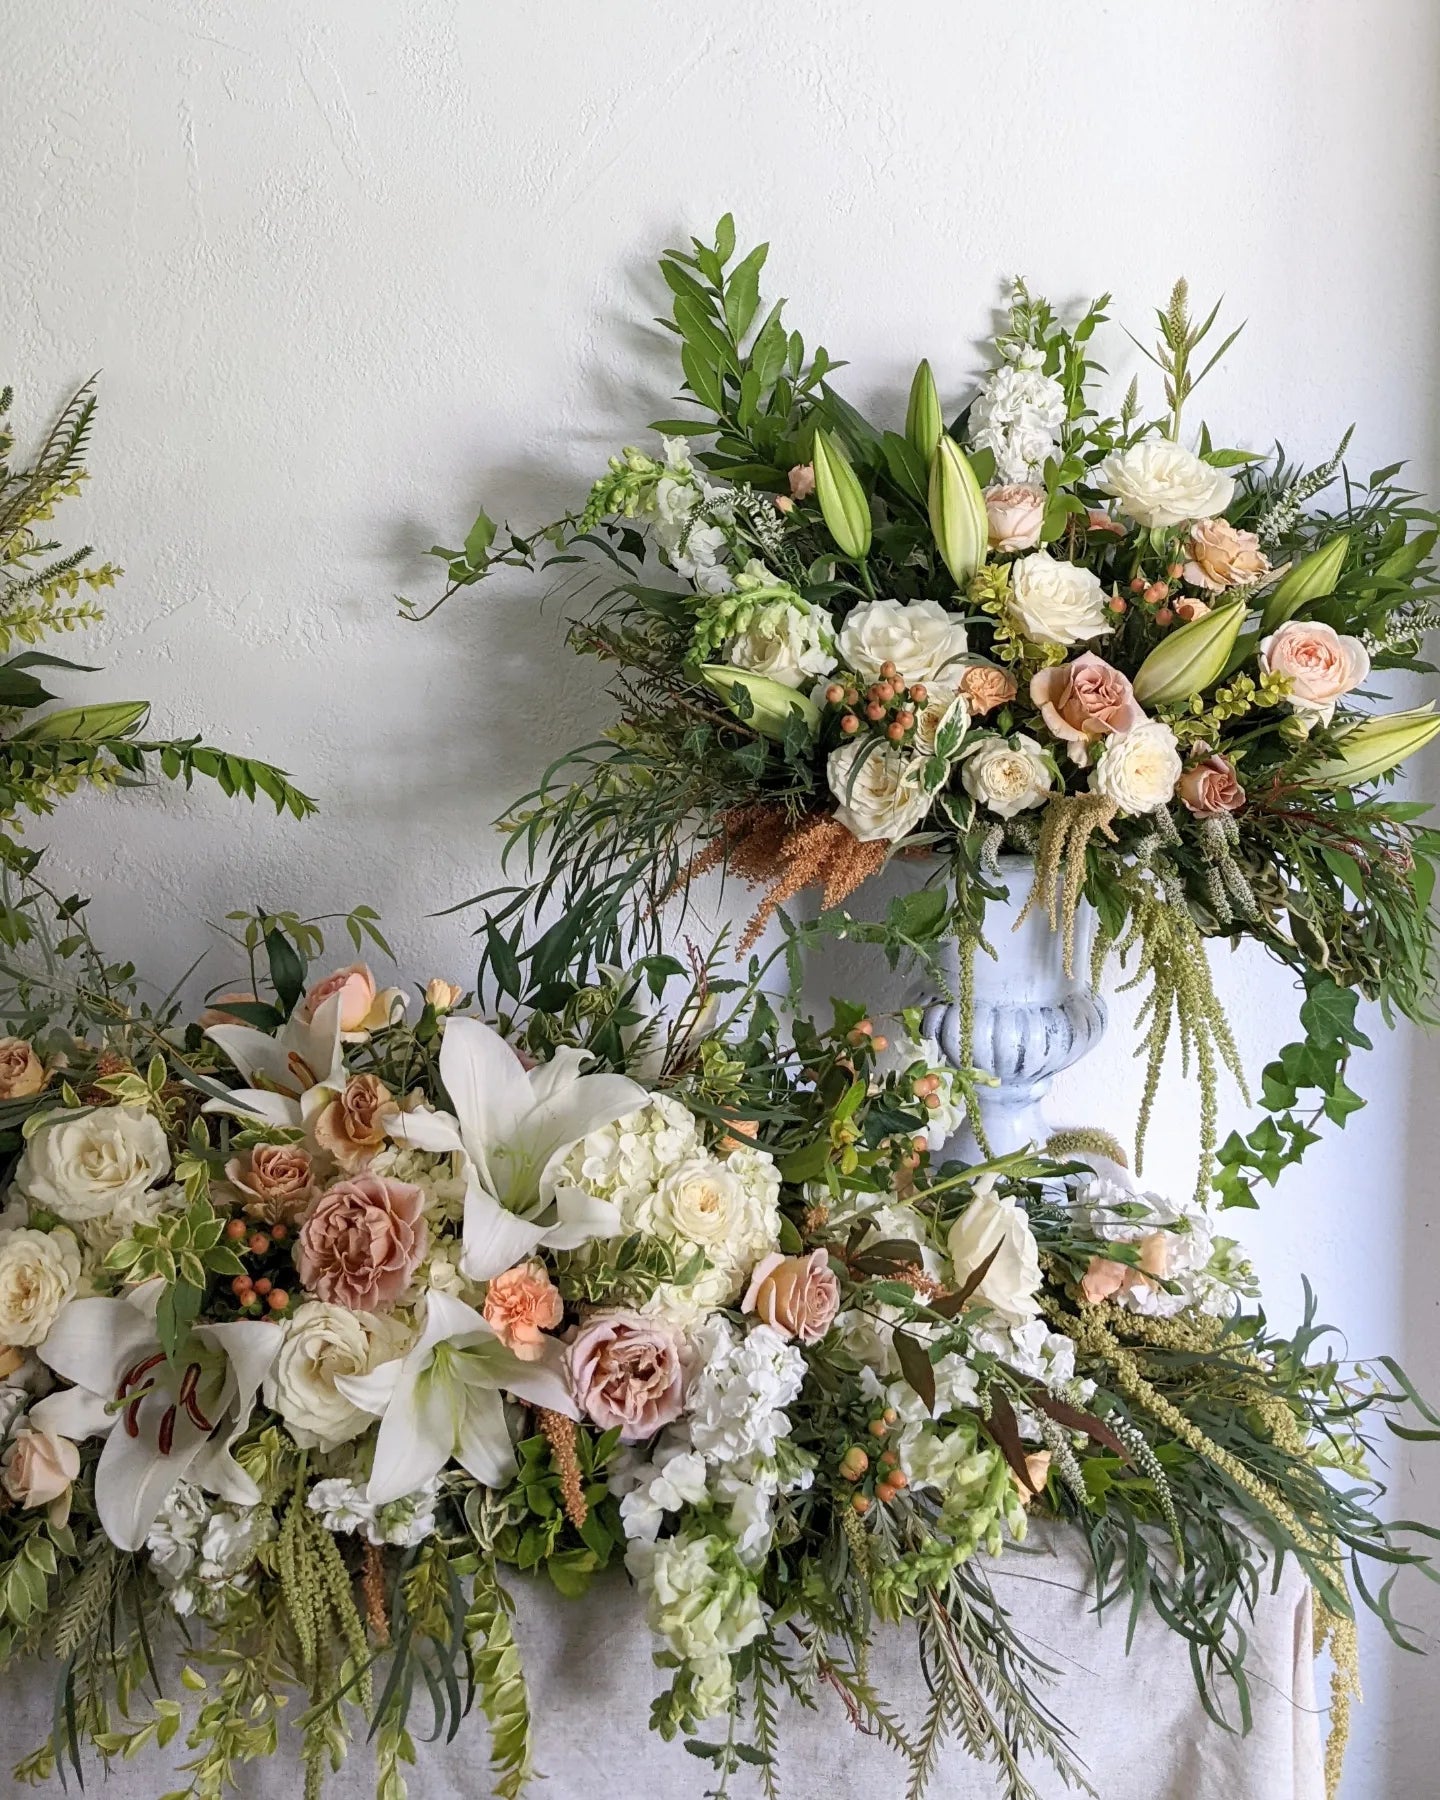 Funeral flower arrangements for Local Flower Delivery